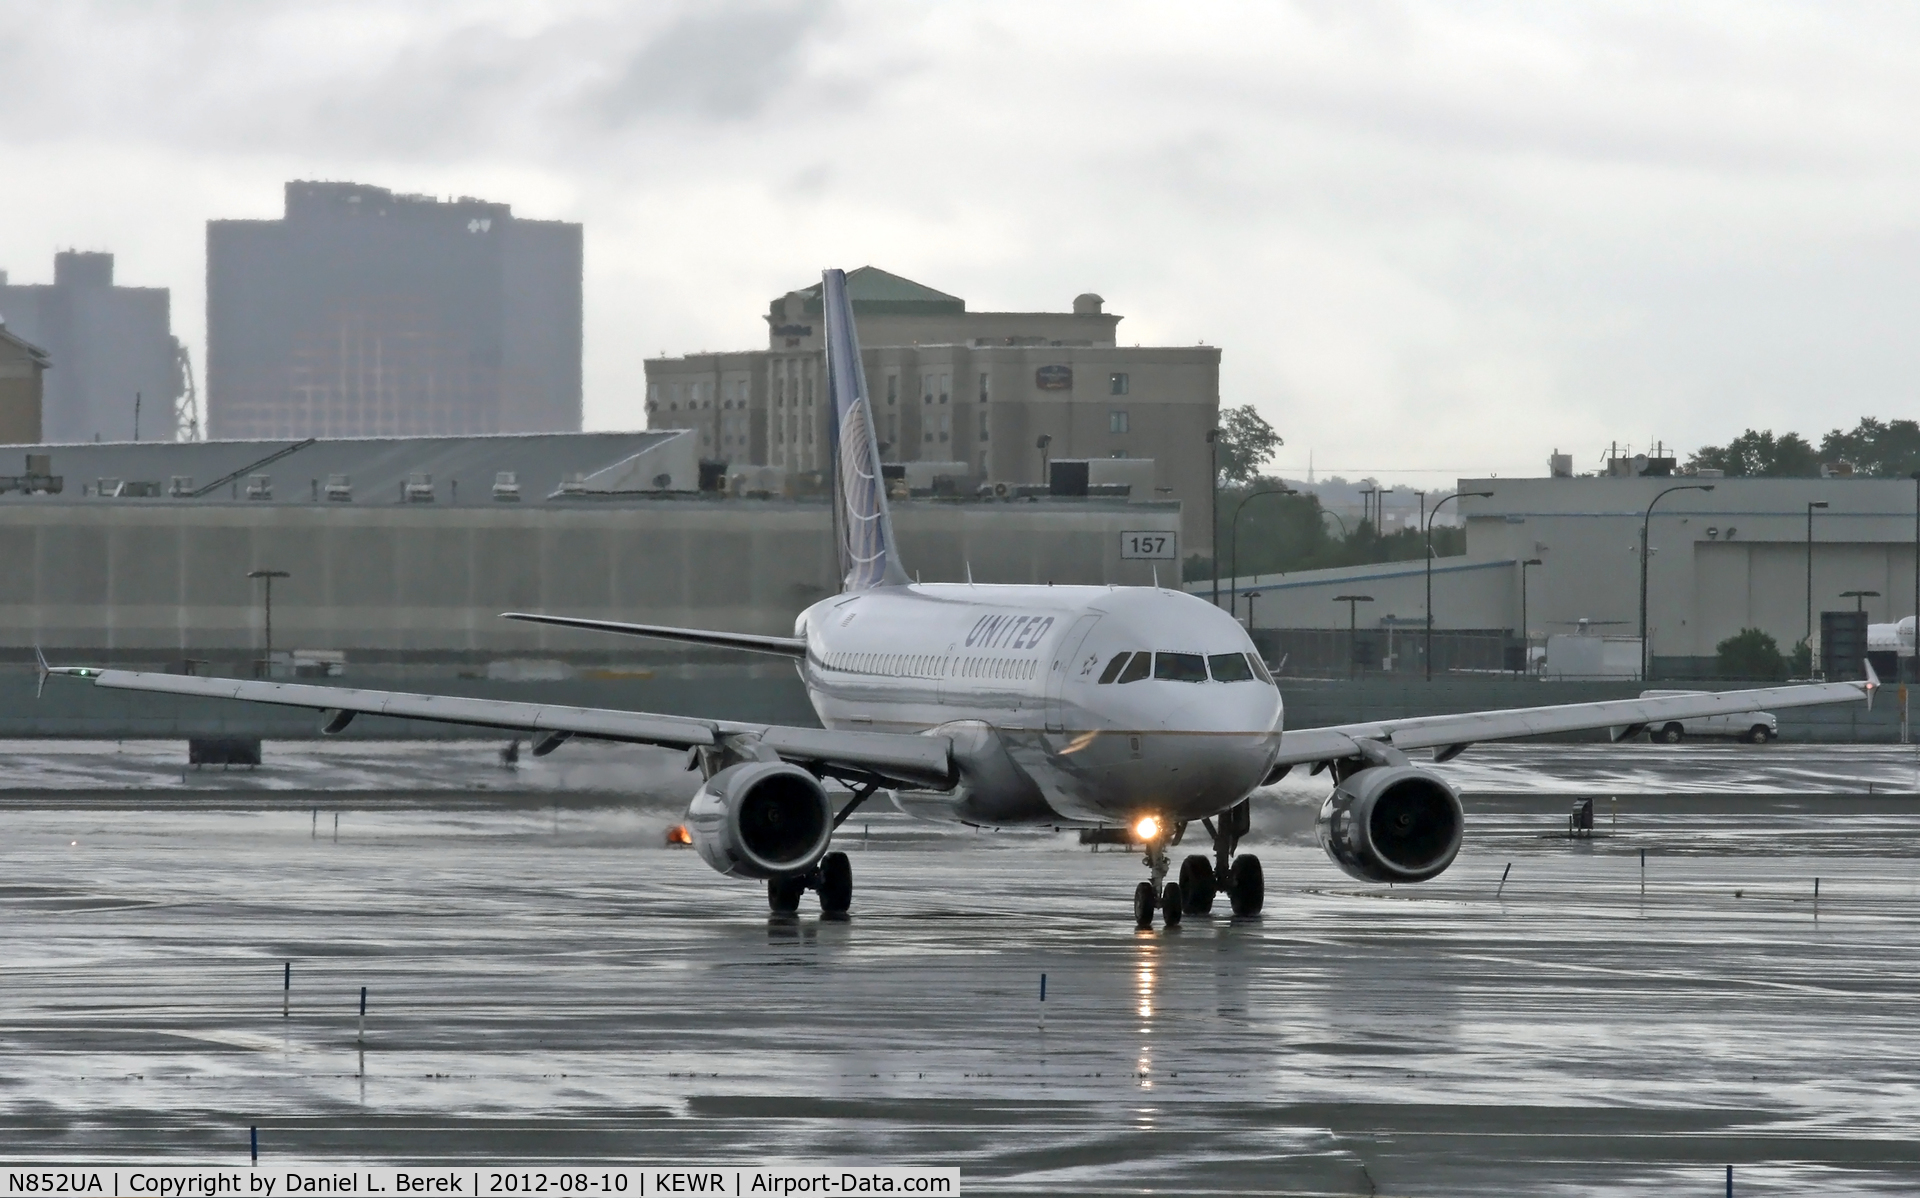 N852UA, 2002 Airbus A319-131 C/N 1671, A United Airbus A319 taxies in at a very wet Newark International, having weathered severe rainstorms.